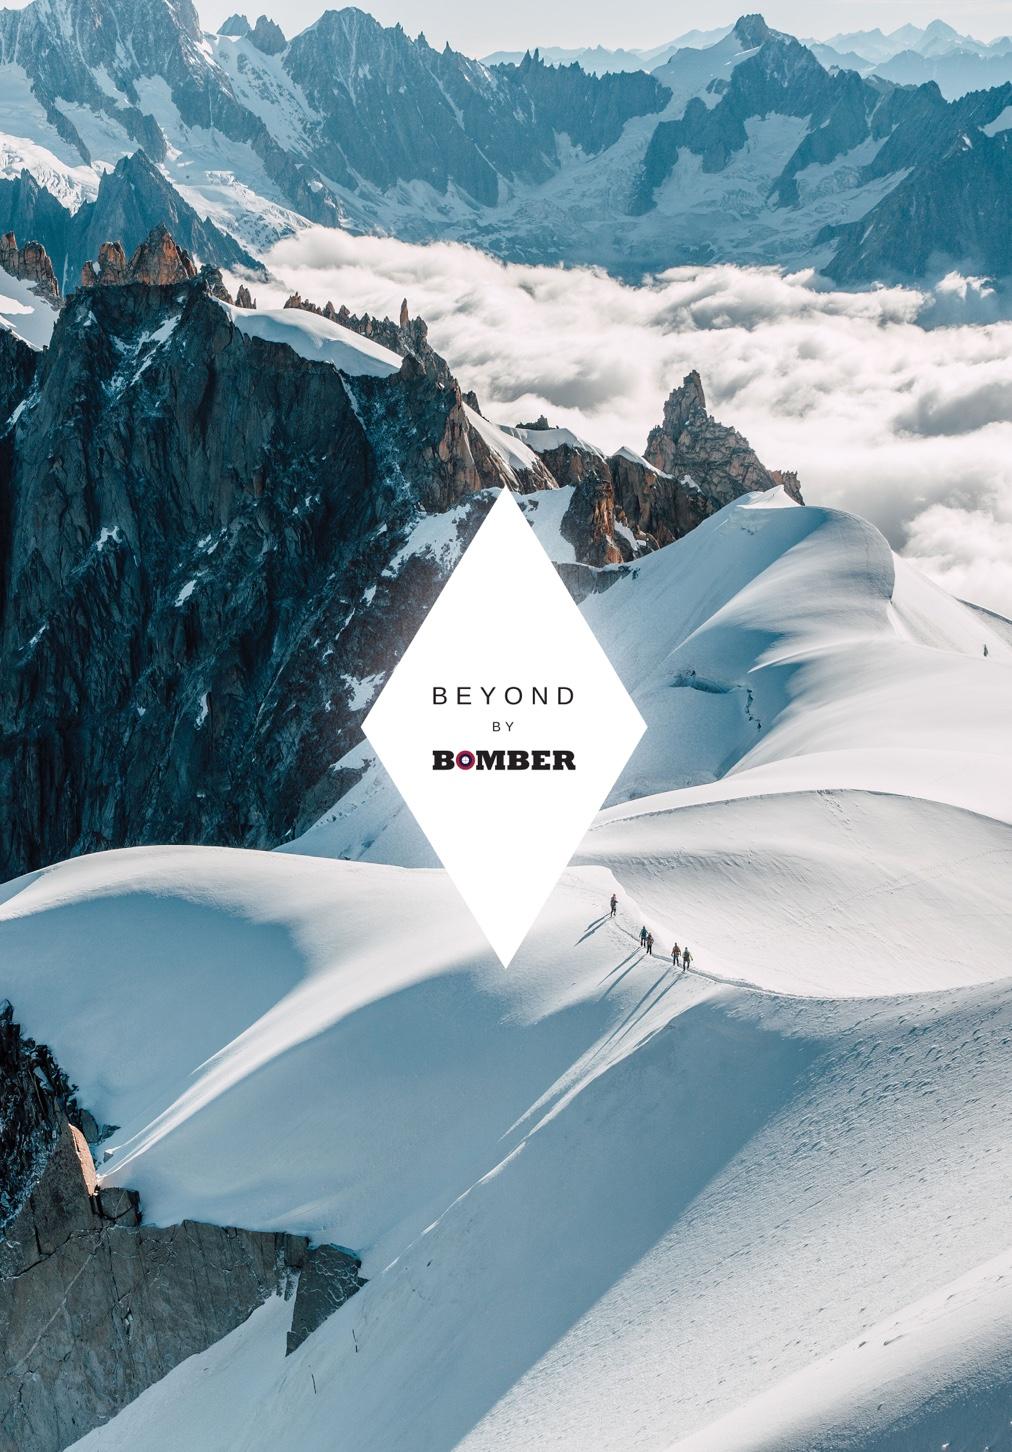 BEYOND is an exclusive community comprised of members at all levels of skiing who, at their core, share a passion for the very best of the skiing lifestyle; those who continually strive to enhance